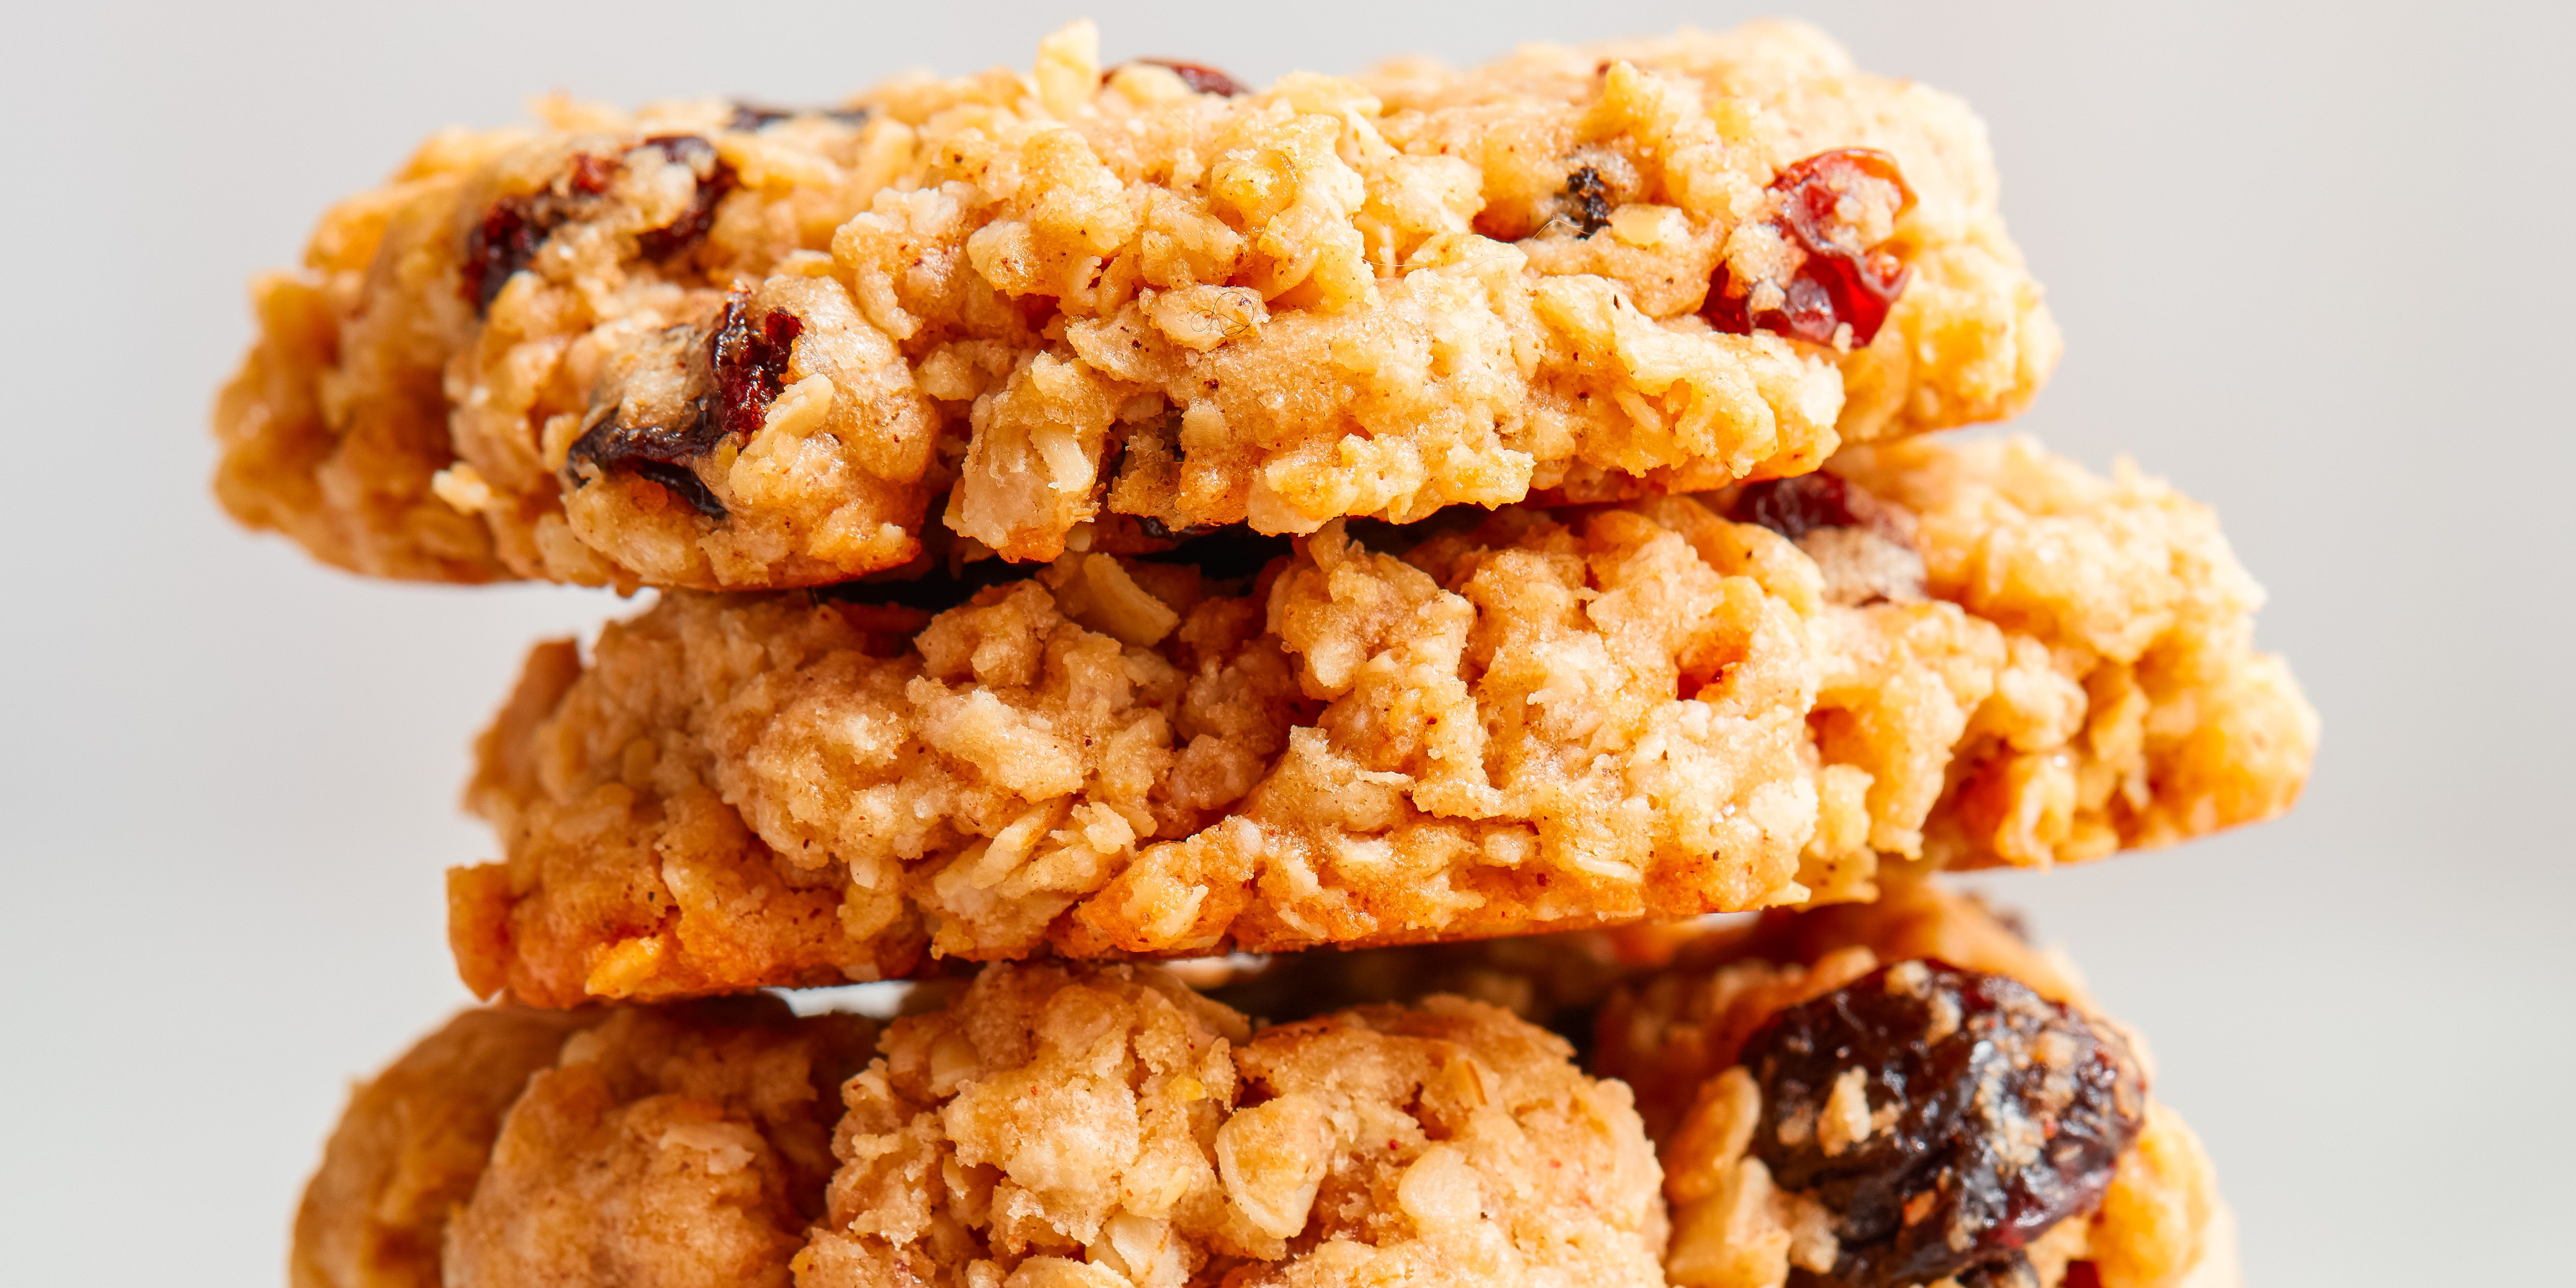 Don't Fall for the Clickbait: Oatmeal Raisin Cookies